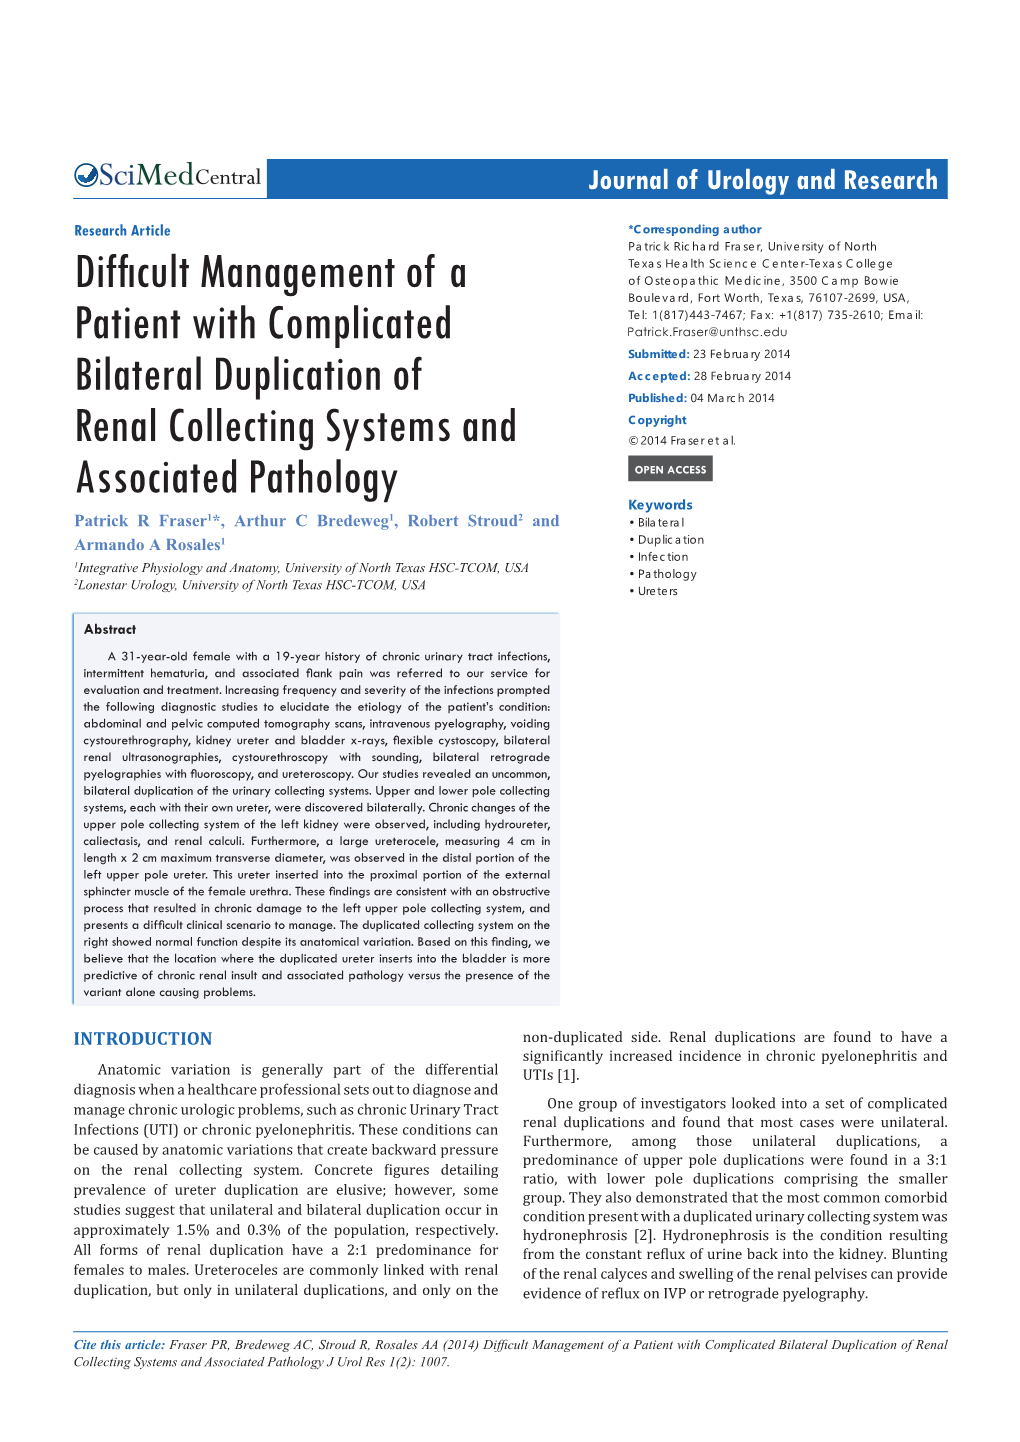 Difficult Management of a Patient with Complicated Bilateral Duplication of Renal Collecting Systems and Associated Pathology J Urol Res 1(2): 1007